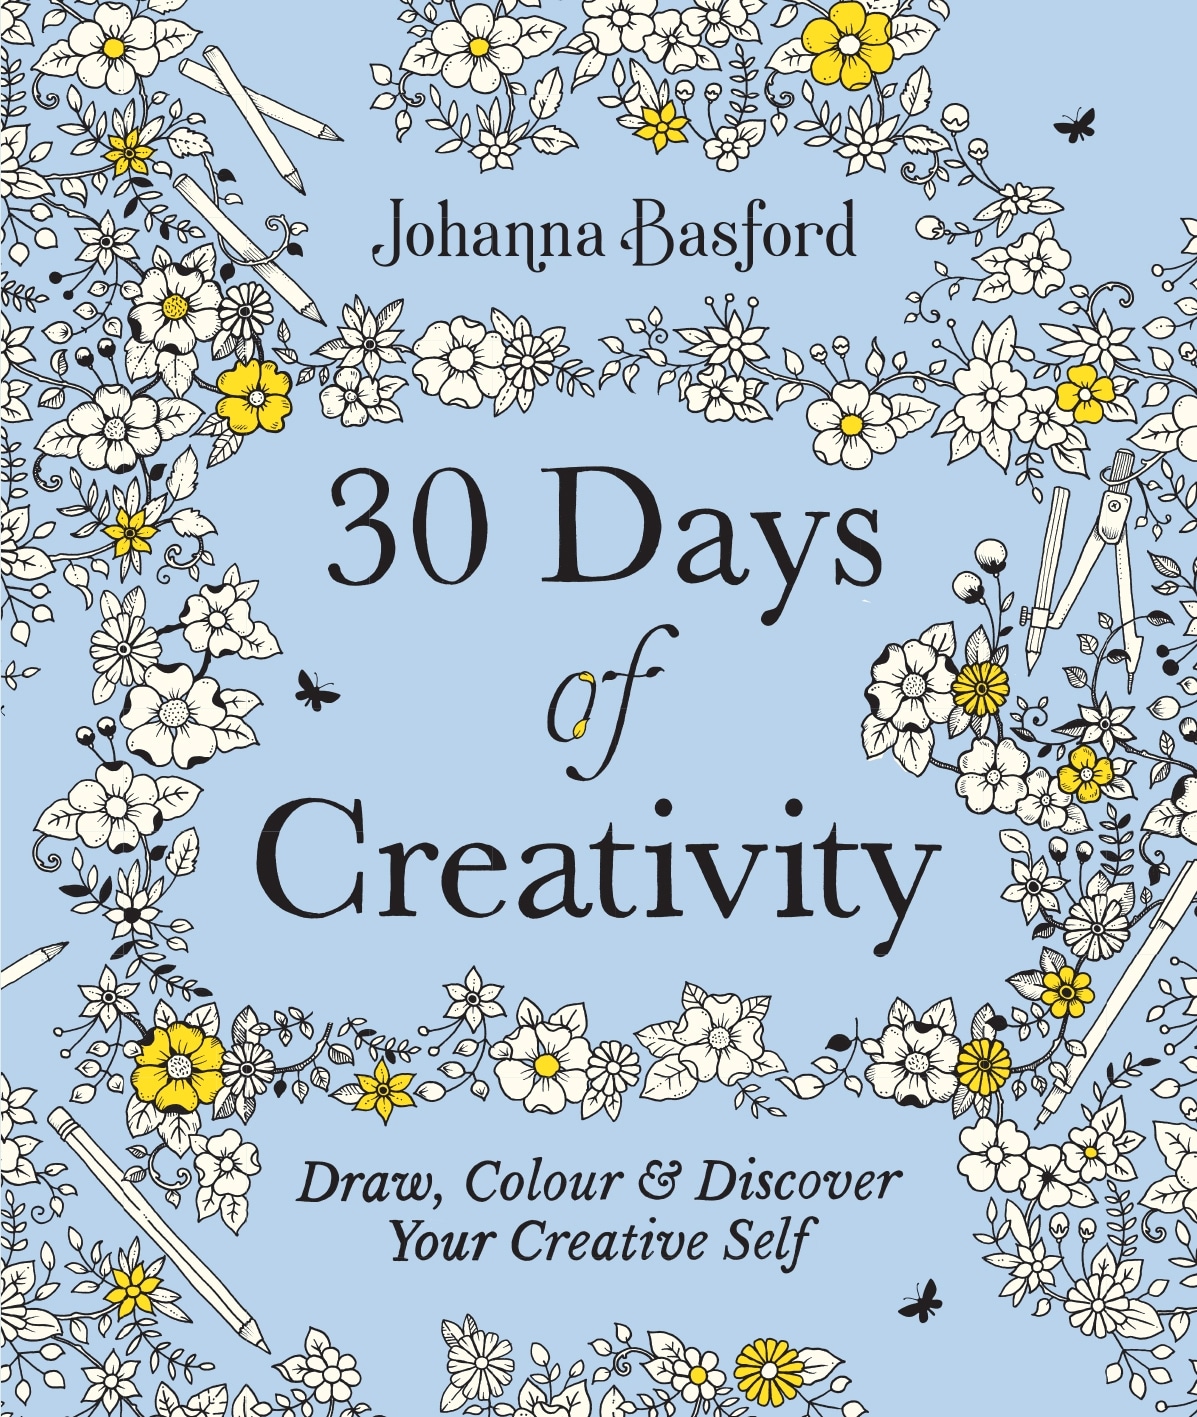 Book “30 Days of Creativity: Draw, Colour and Discover Your Creative Self” by Johanna Basford — October 28, 2021